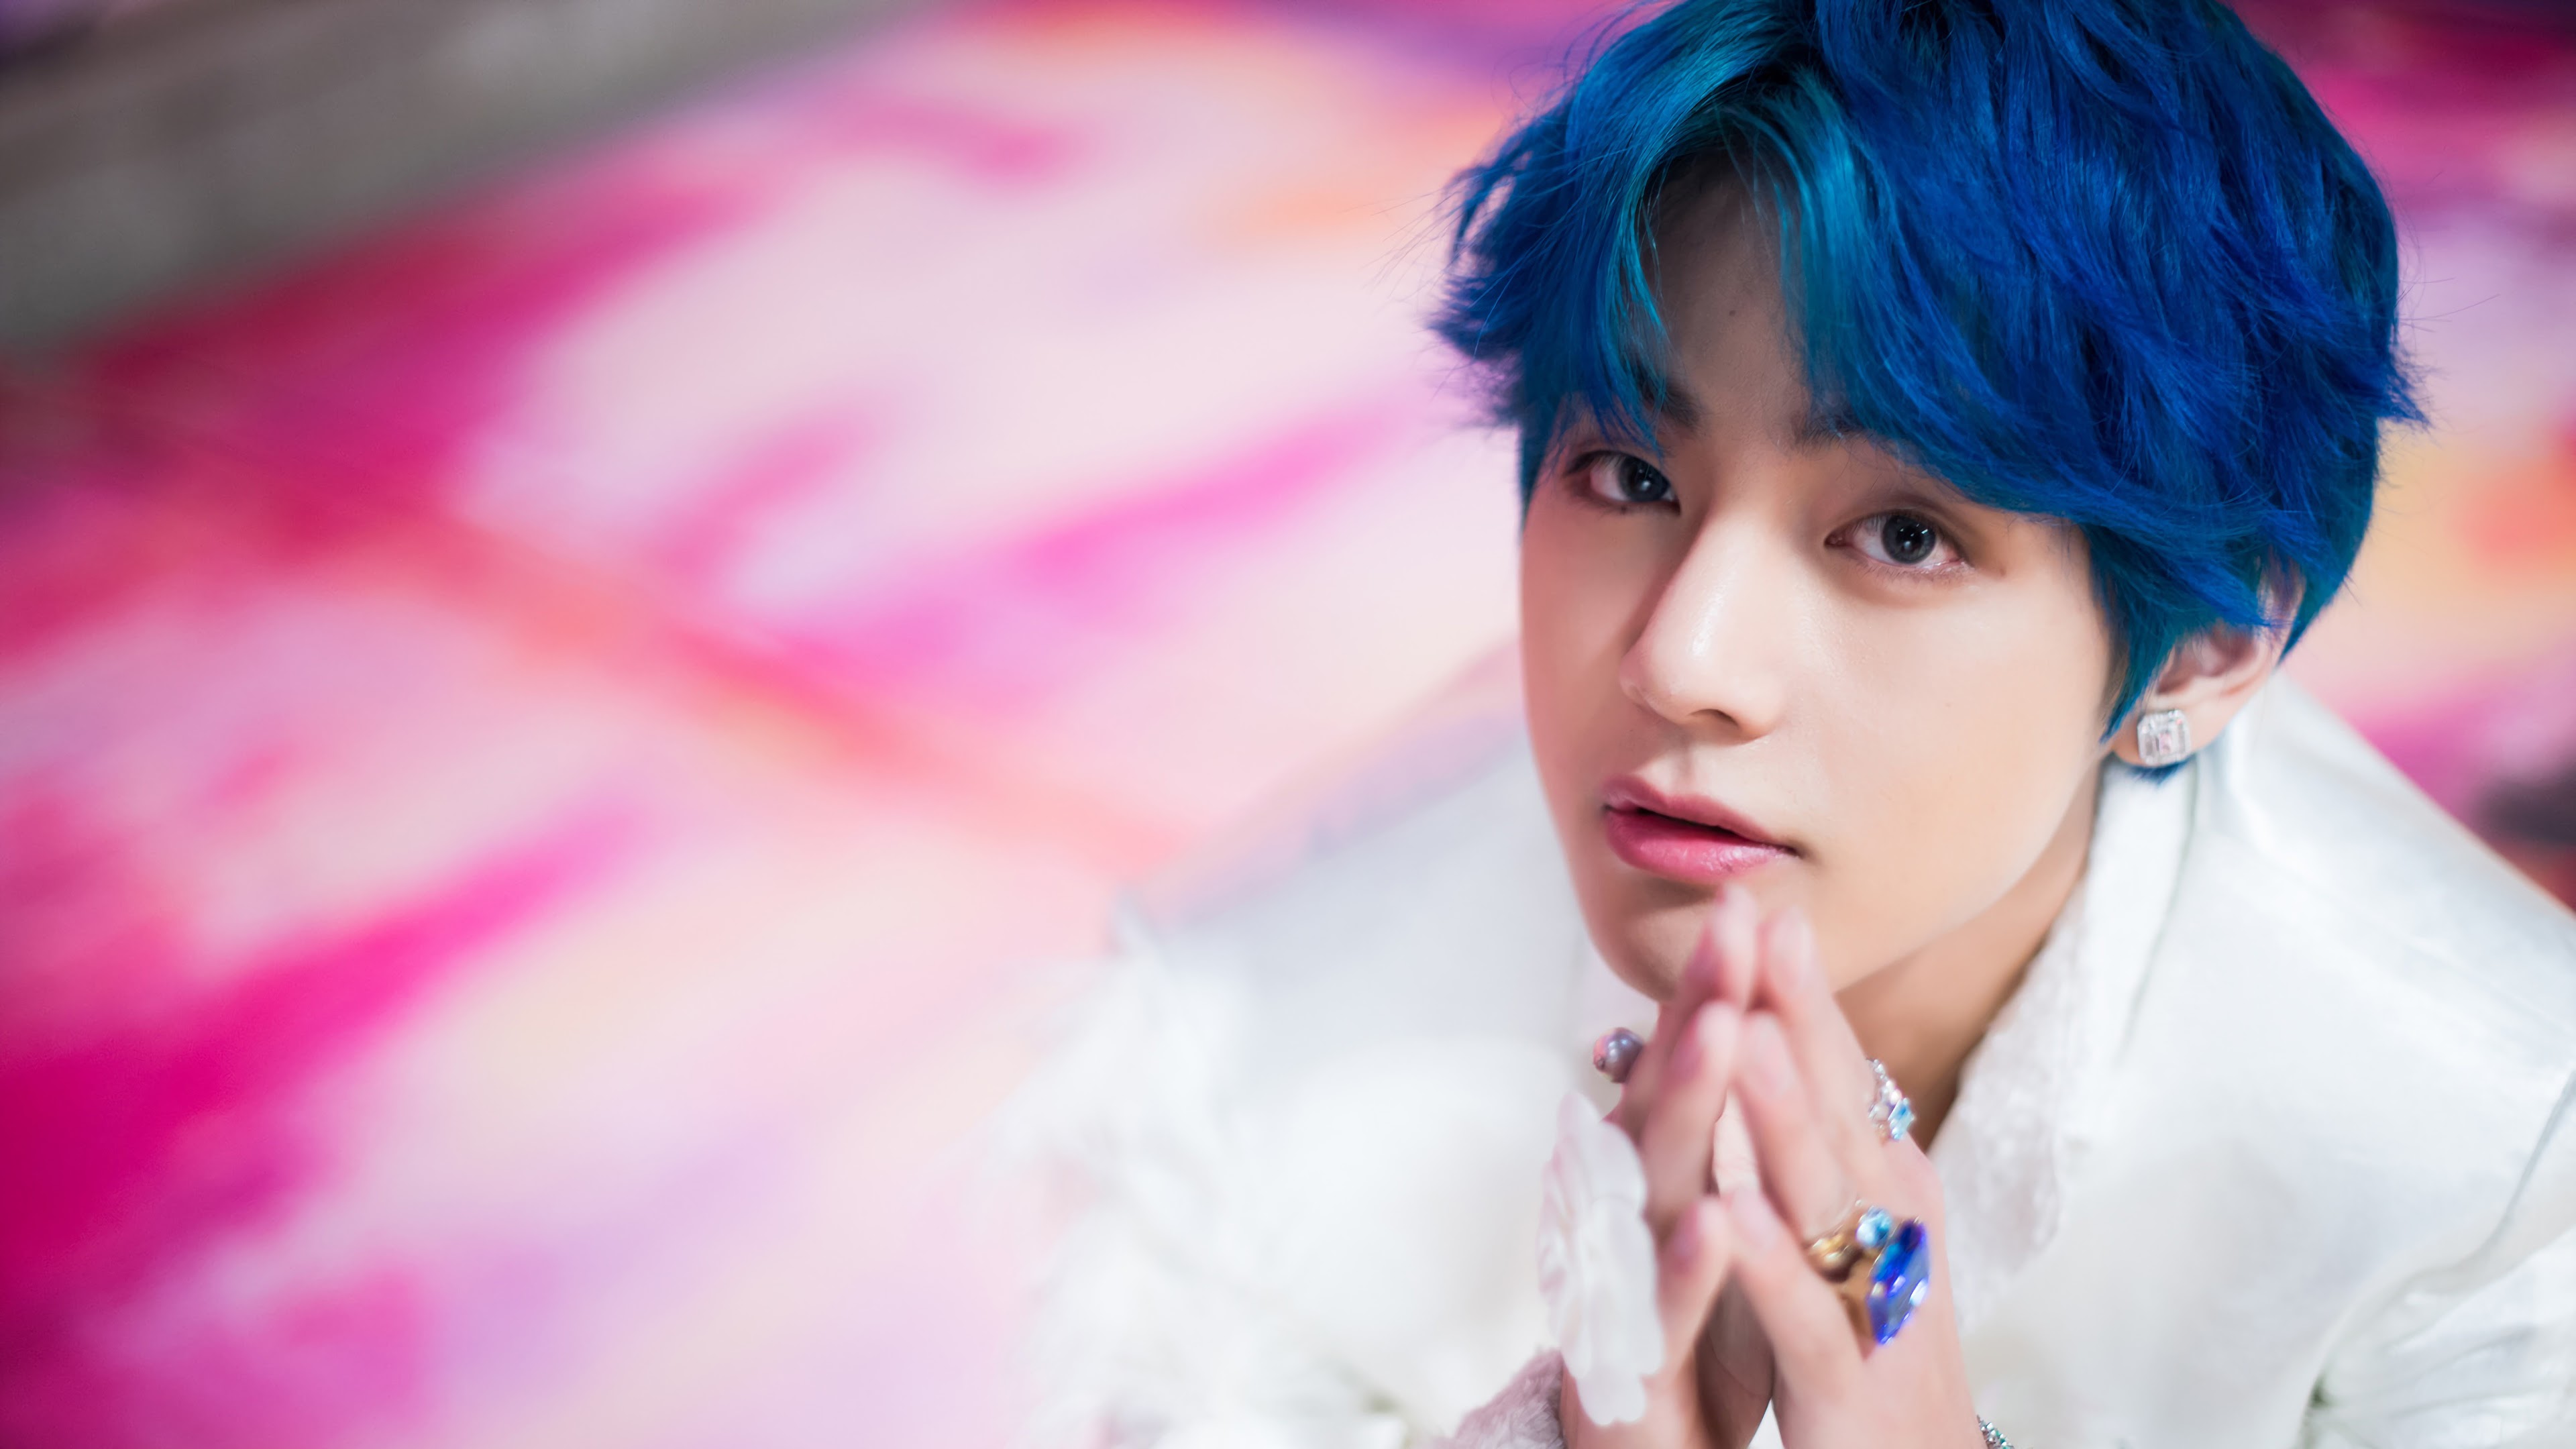 BTS' J-Hope's Blue Hair in "Boy With Luv" Music Video - wide 2